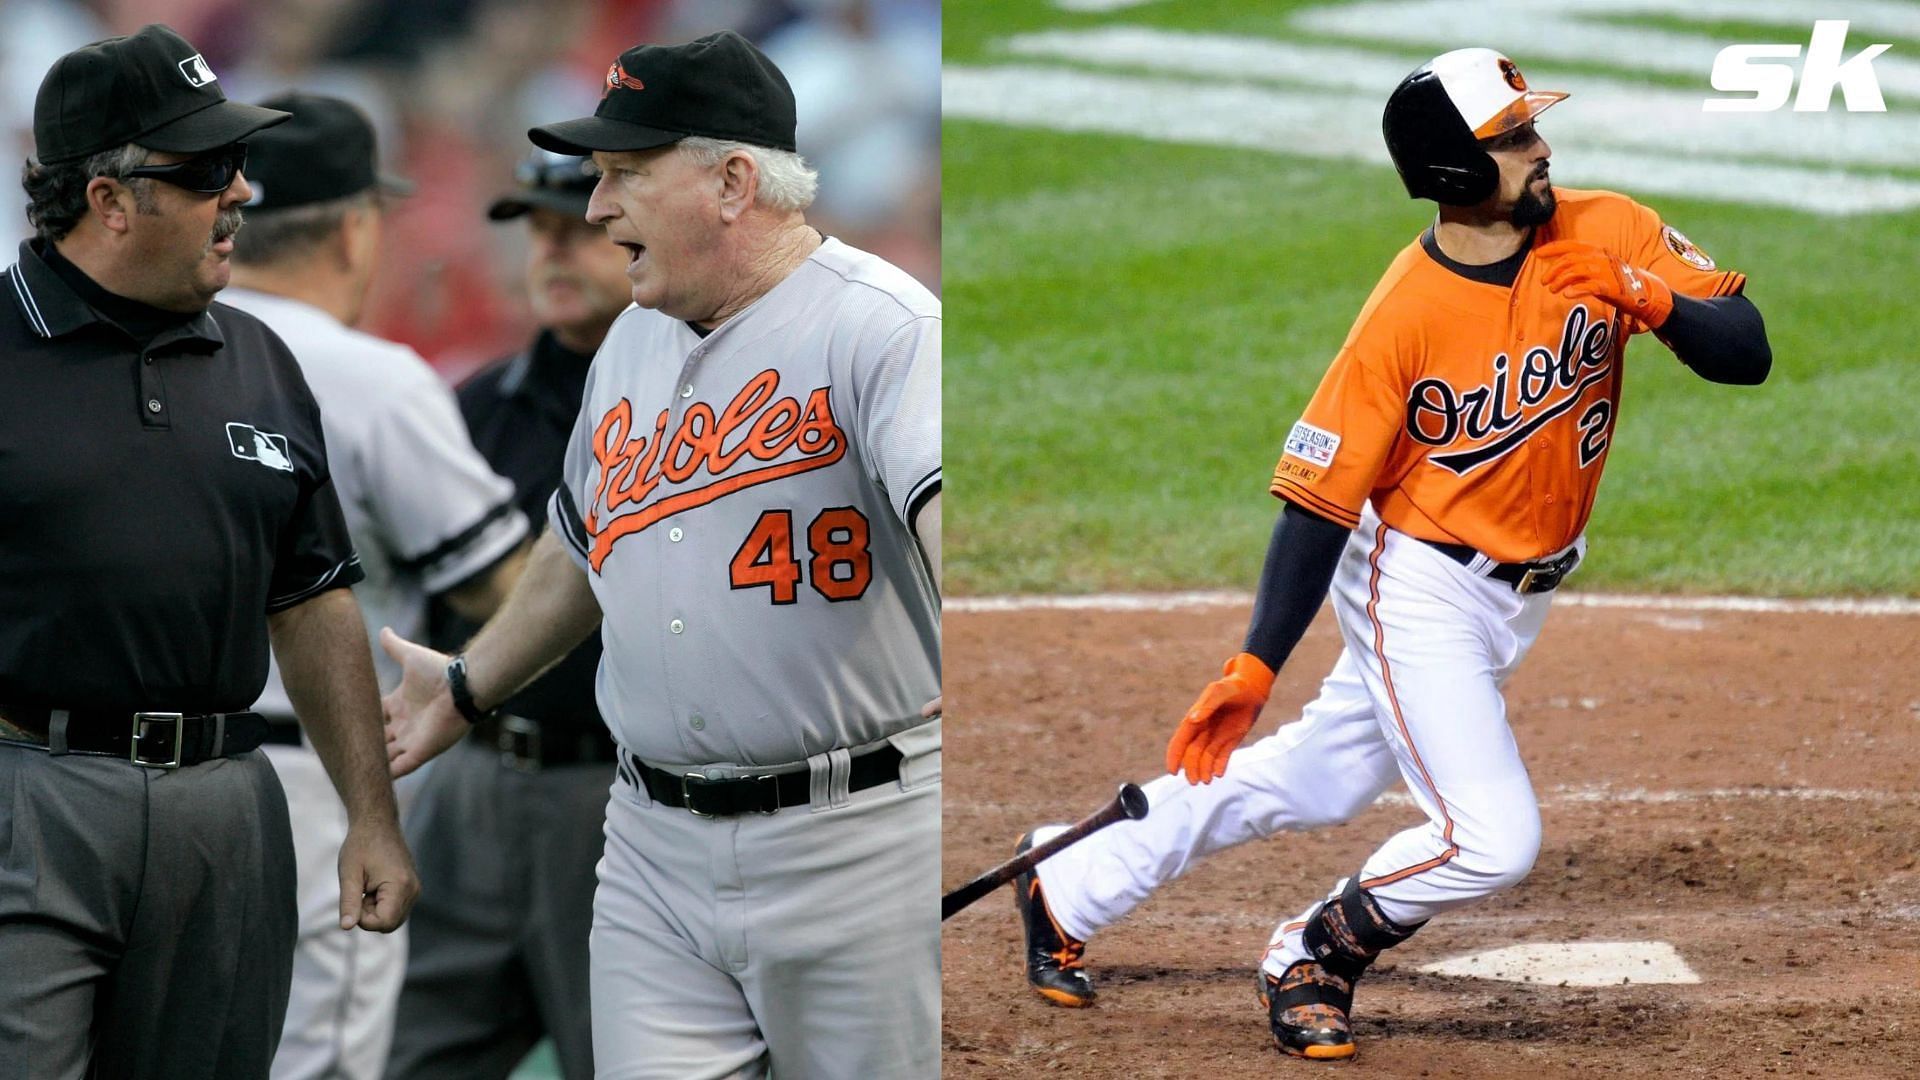 Terry Crowley and Nick Markakis are among the latest inductees into the Baltimore Orioles Hall of Fame